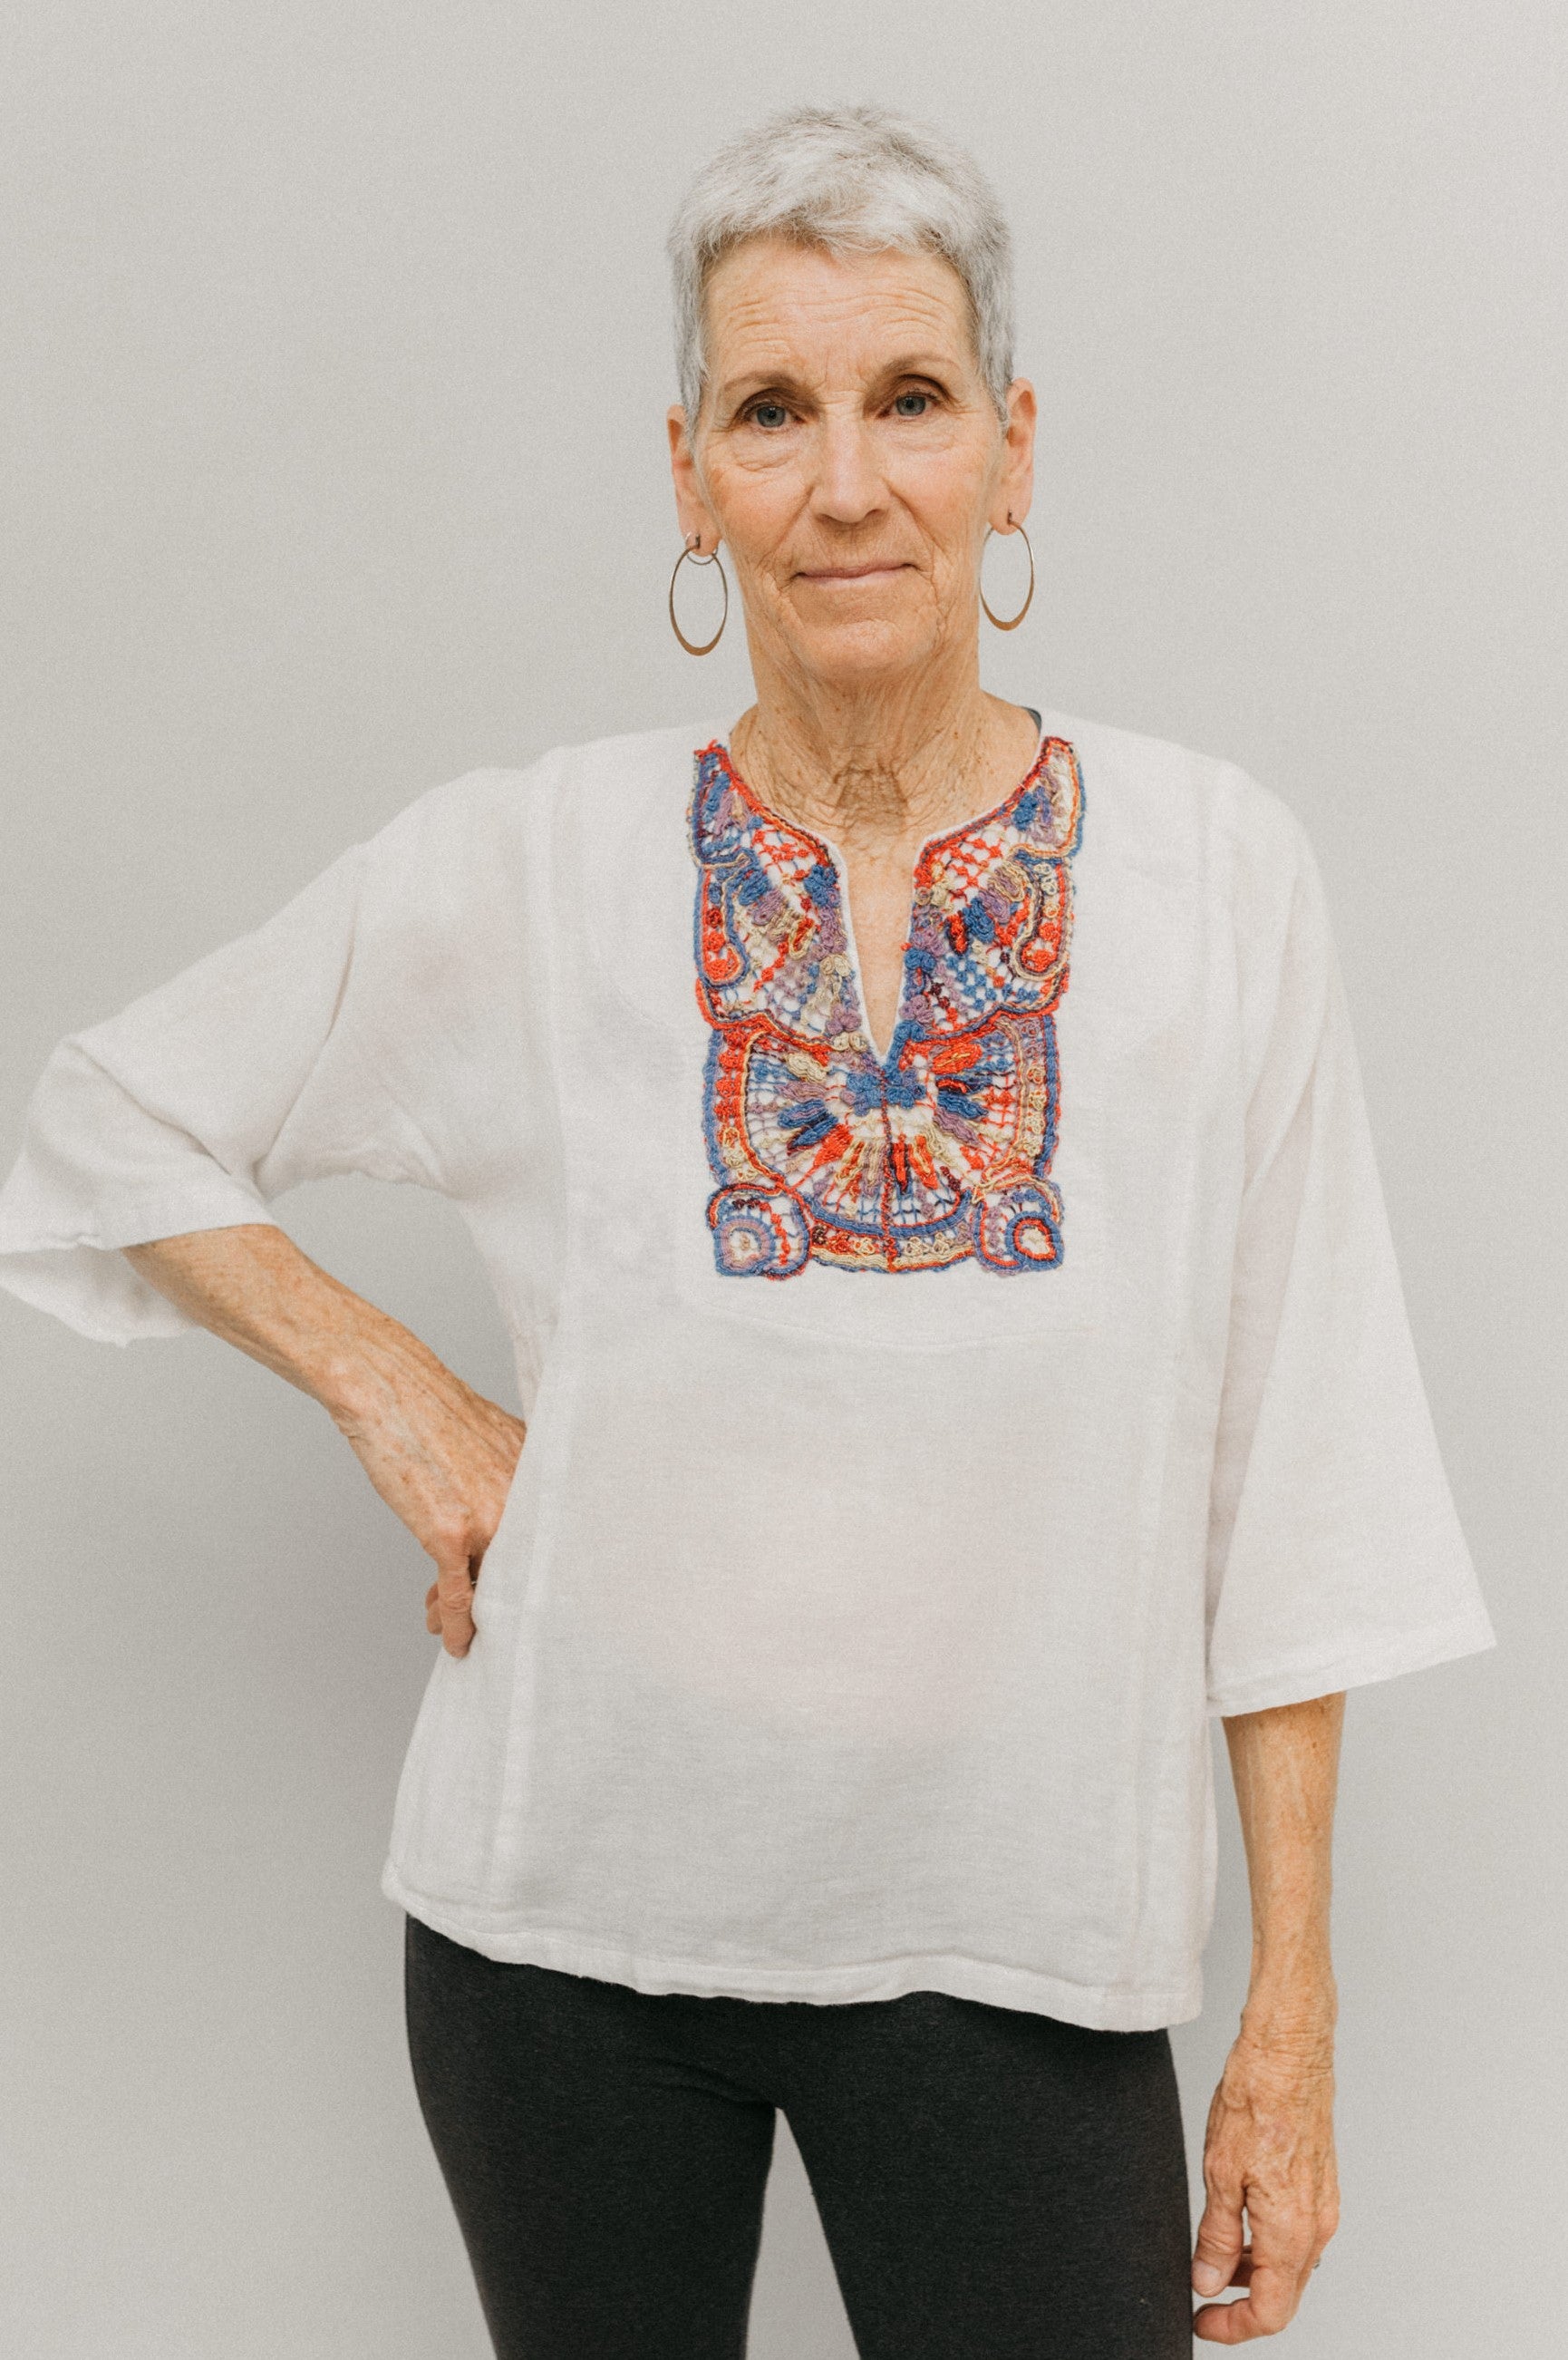 Older woman in short version of Egyptian top.  Top is made in a white gauze fabric with multi-colored embroidery on yoke.  Model has one hand on hip and poses with white backdrop.